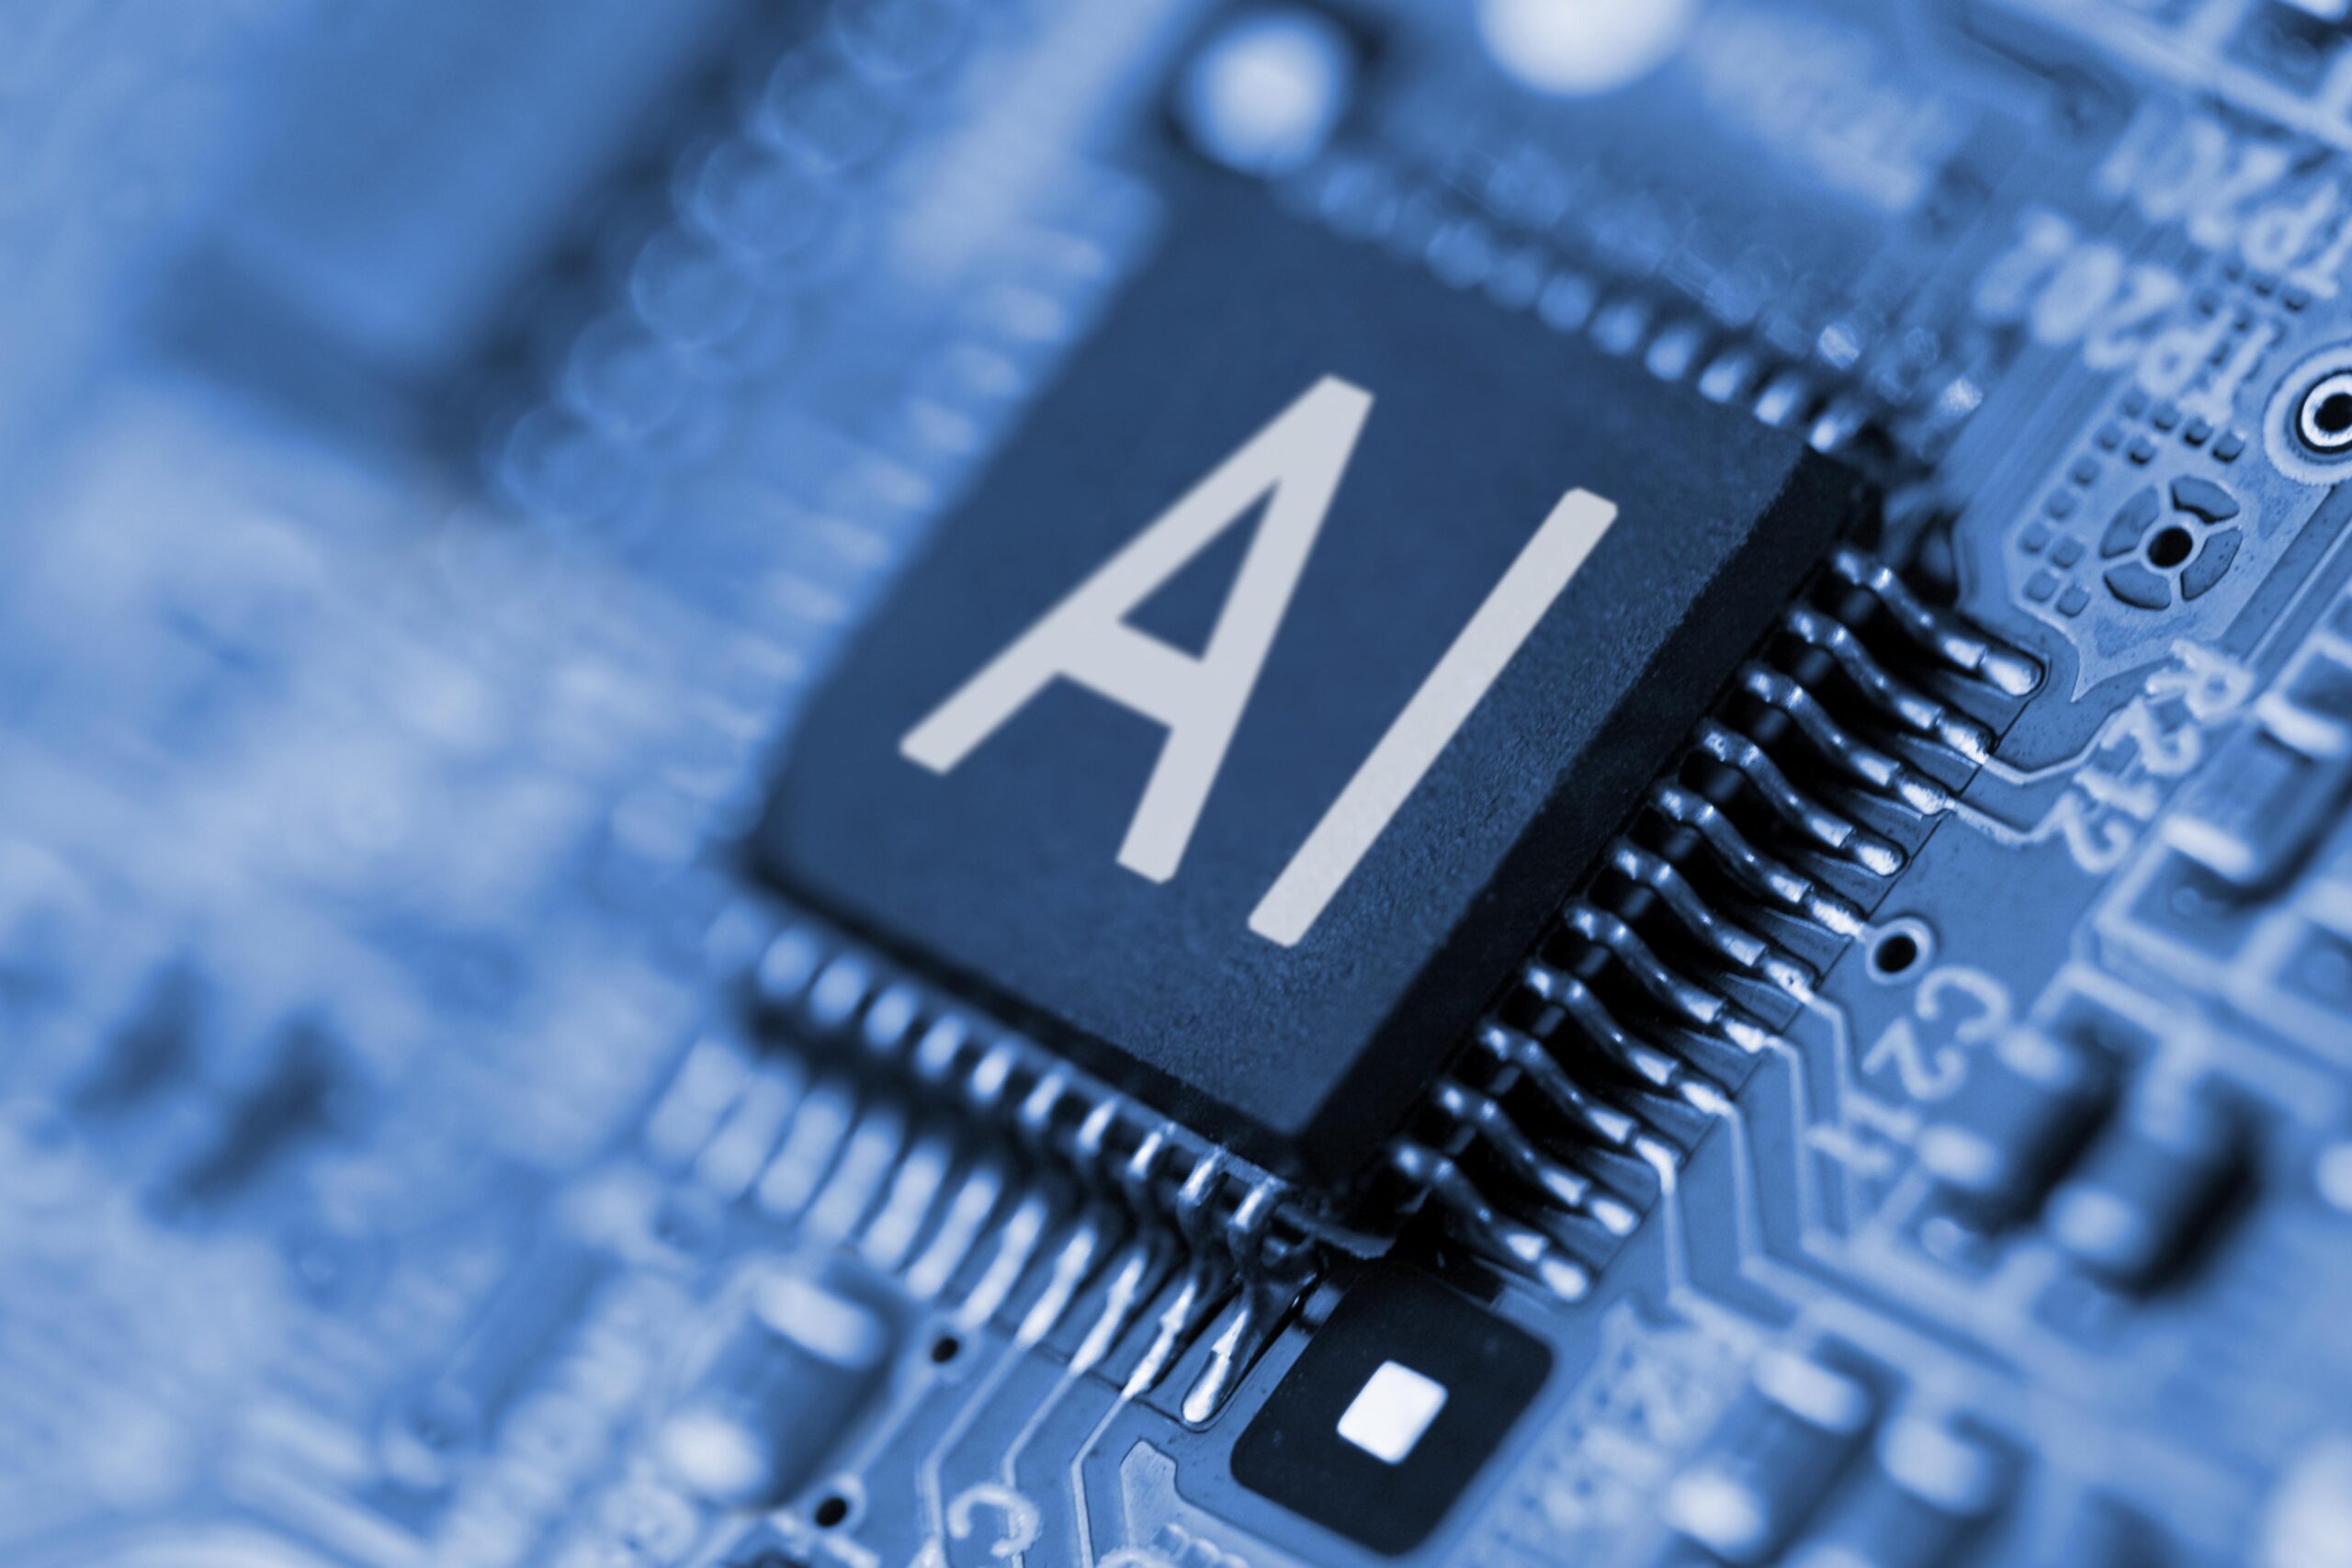 Cover image for "The Rise of Generative AI", featuring a computer motherboard with an Artificial Intelligence chip.